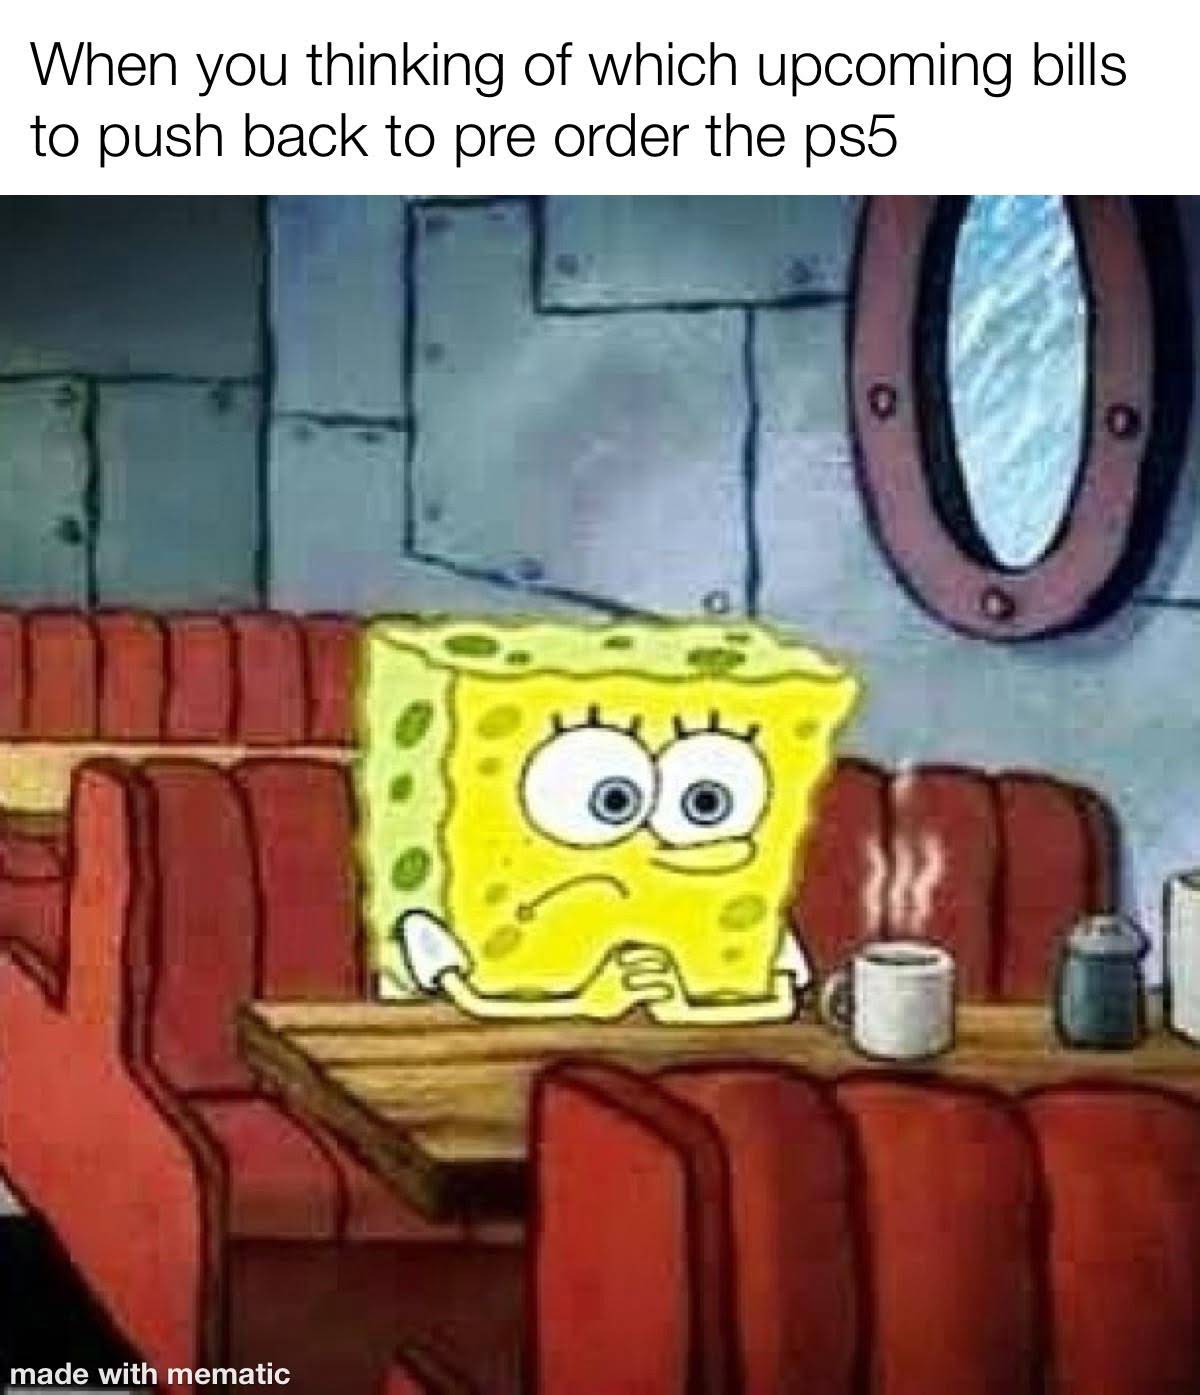 ps5 secured memes - rotc memes spongebob - When you thinking of which upcoming bills to push back to pre order the ps5 made with mematic